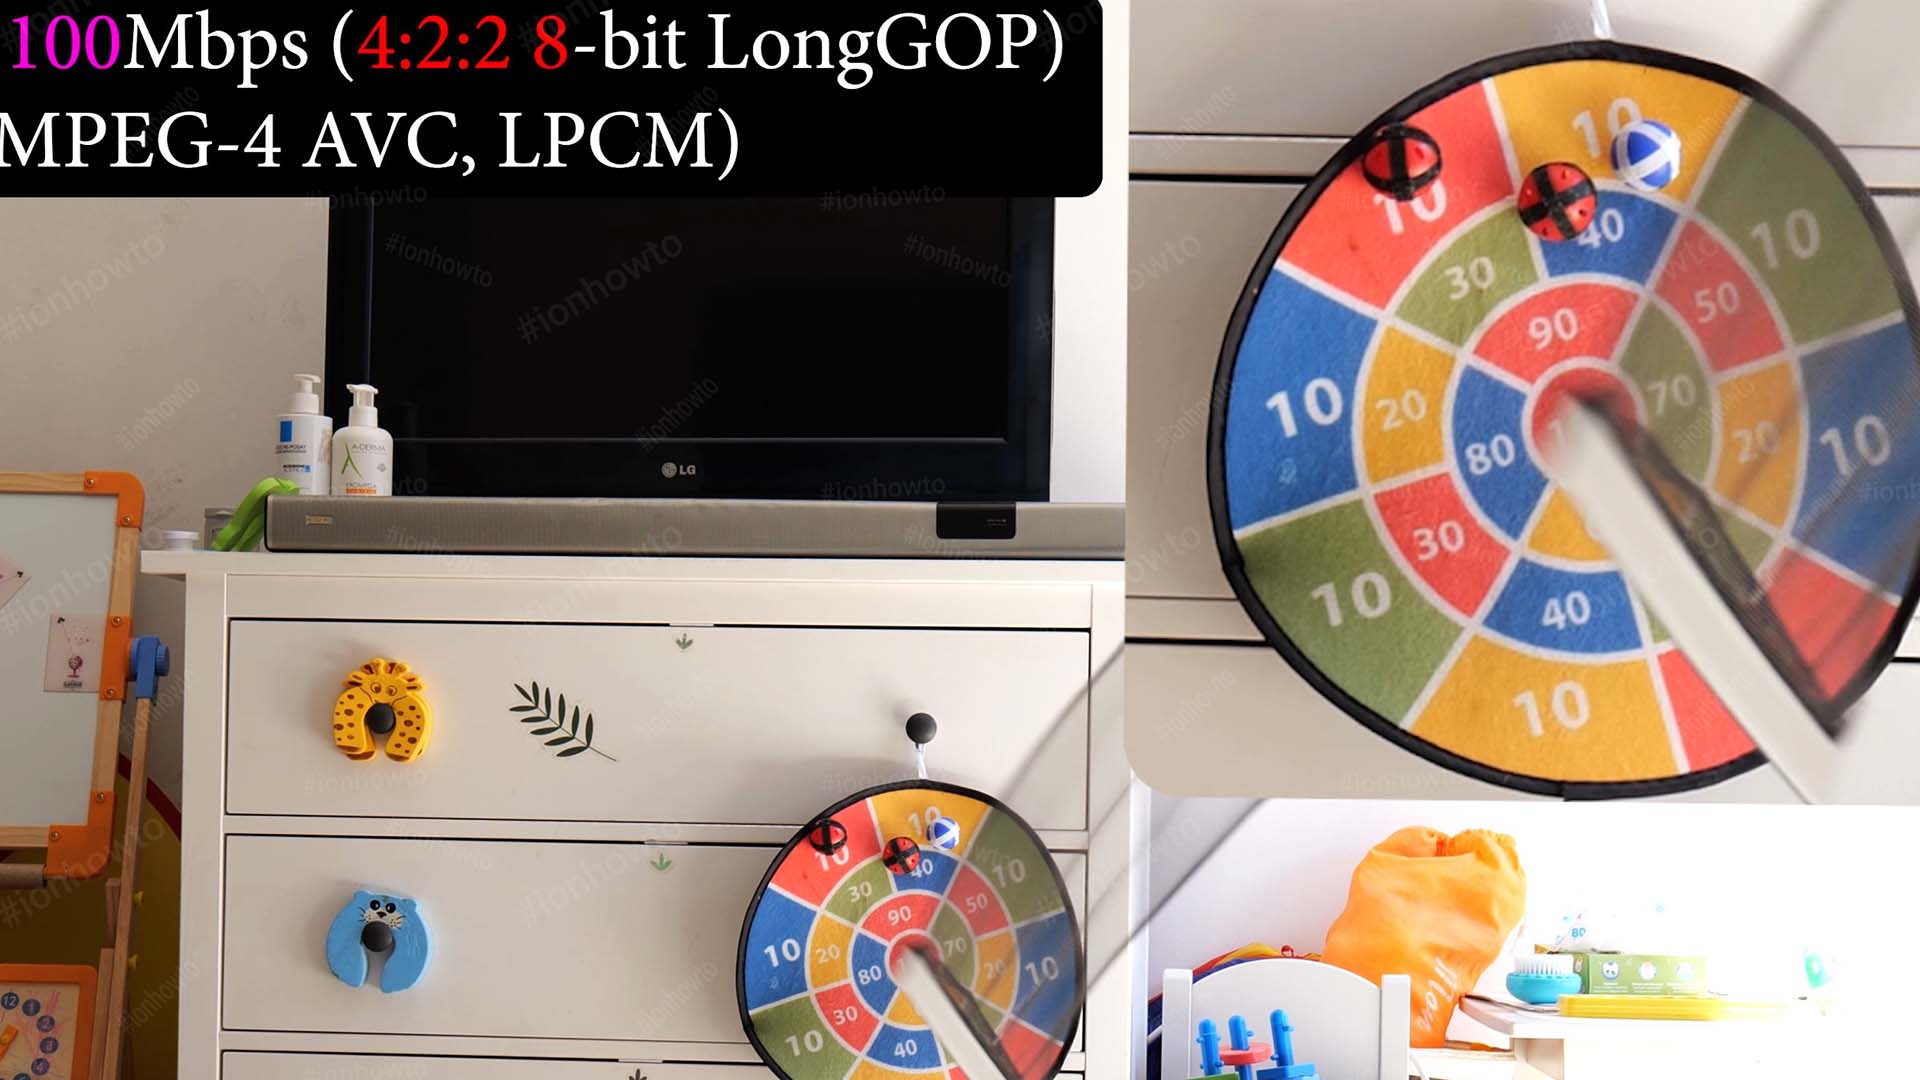 Panasonic Lumix S5 codecs compared zoomed in for details and color